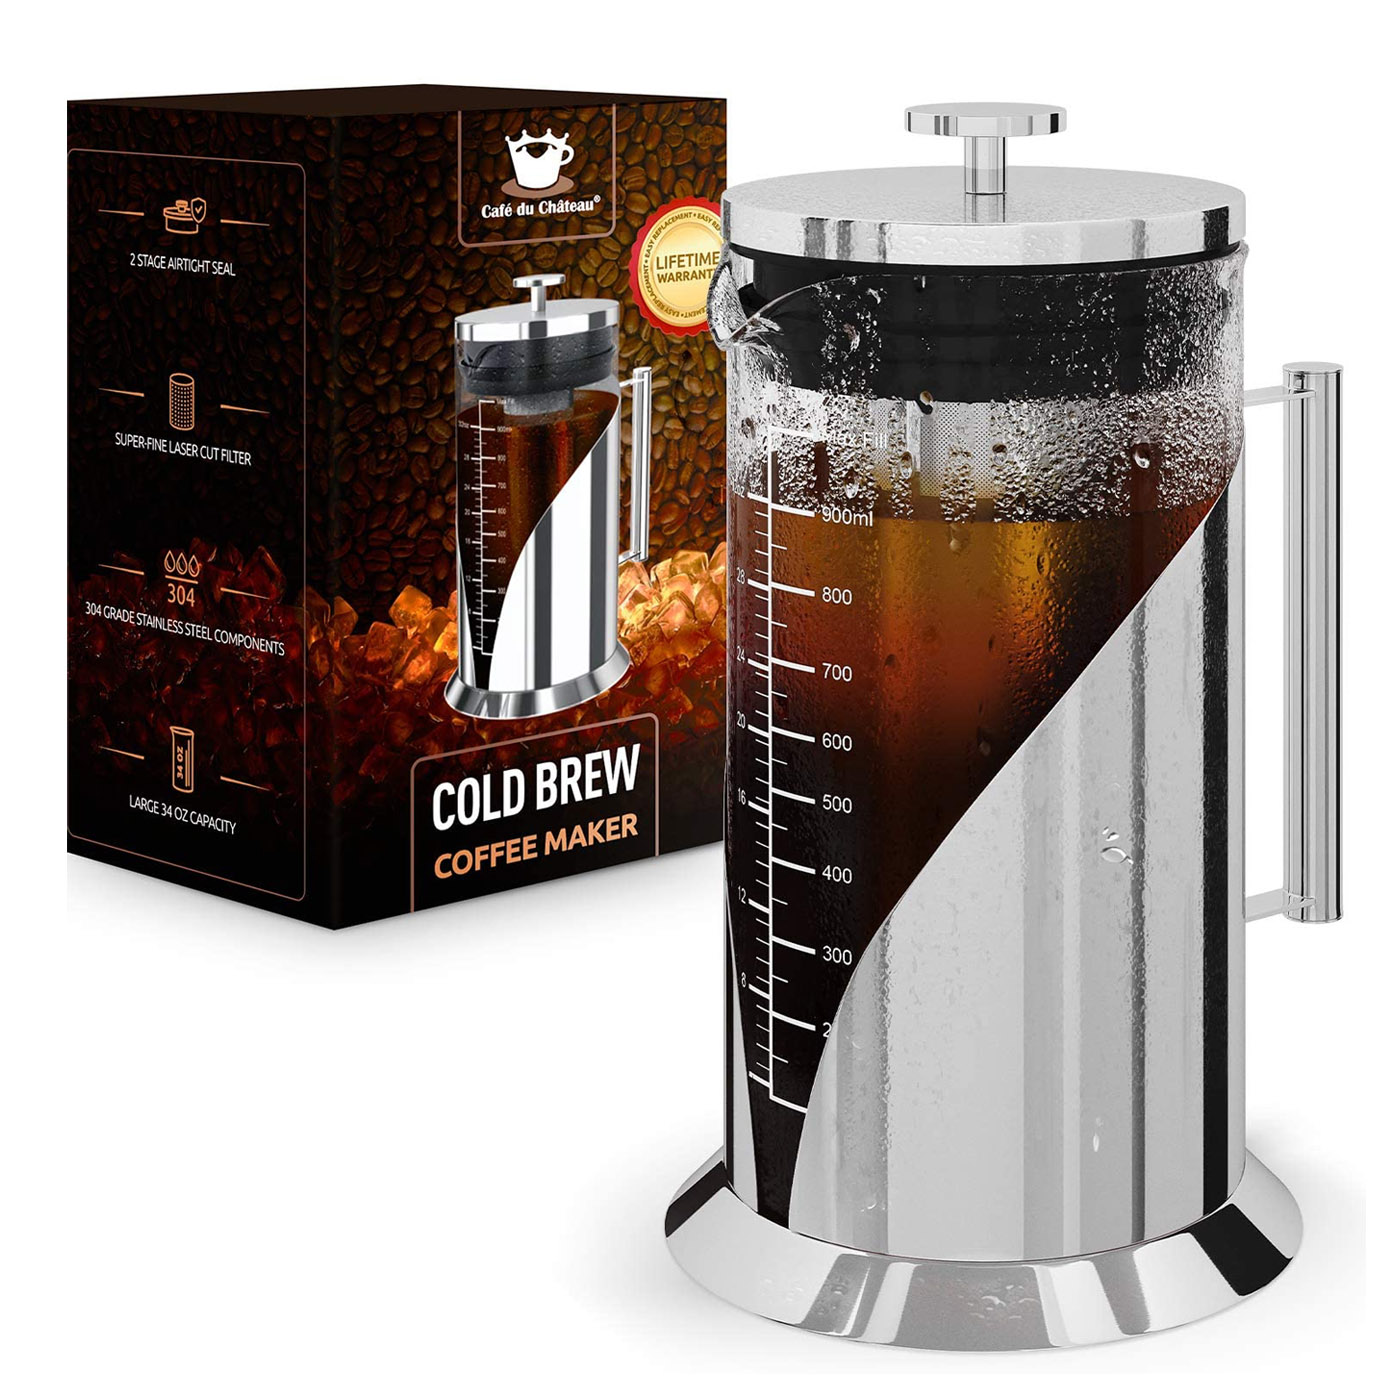  Cafe du Chateau Cold Brew Coffee Maker